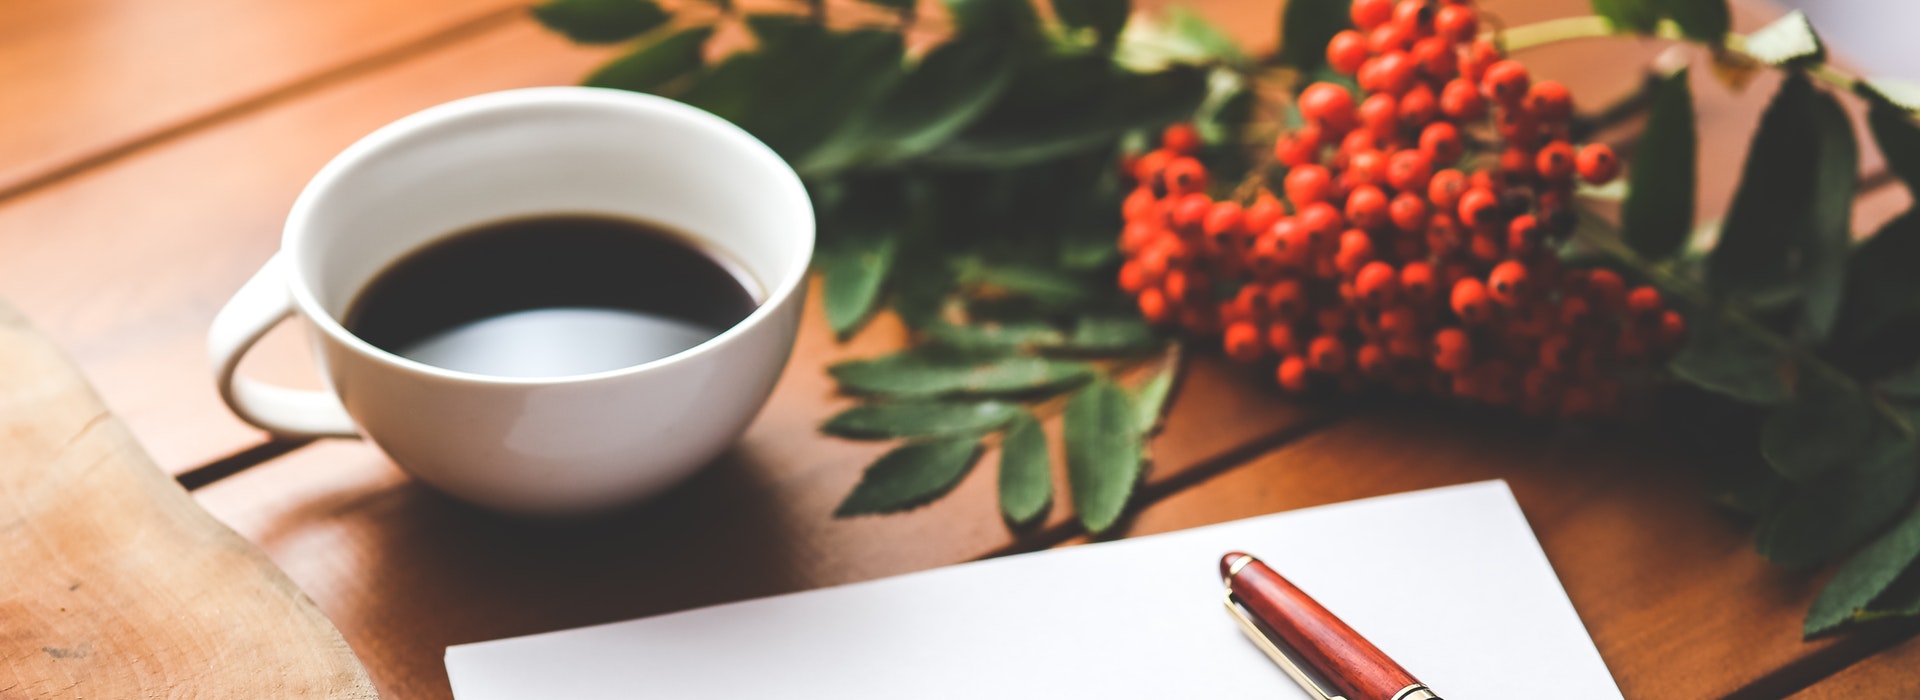 A white cup of coffee, a sheet of blank paper and some autumn foliage lay across a wooden desk